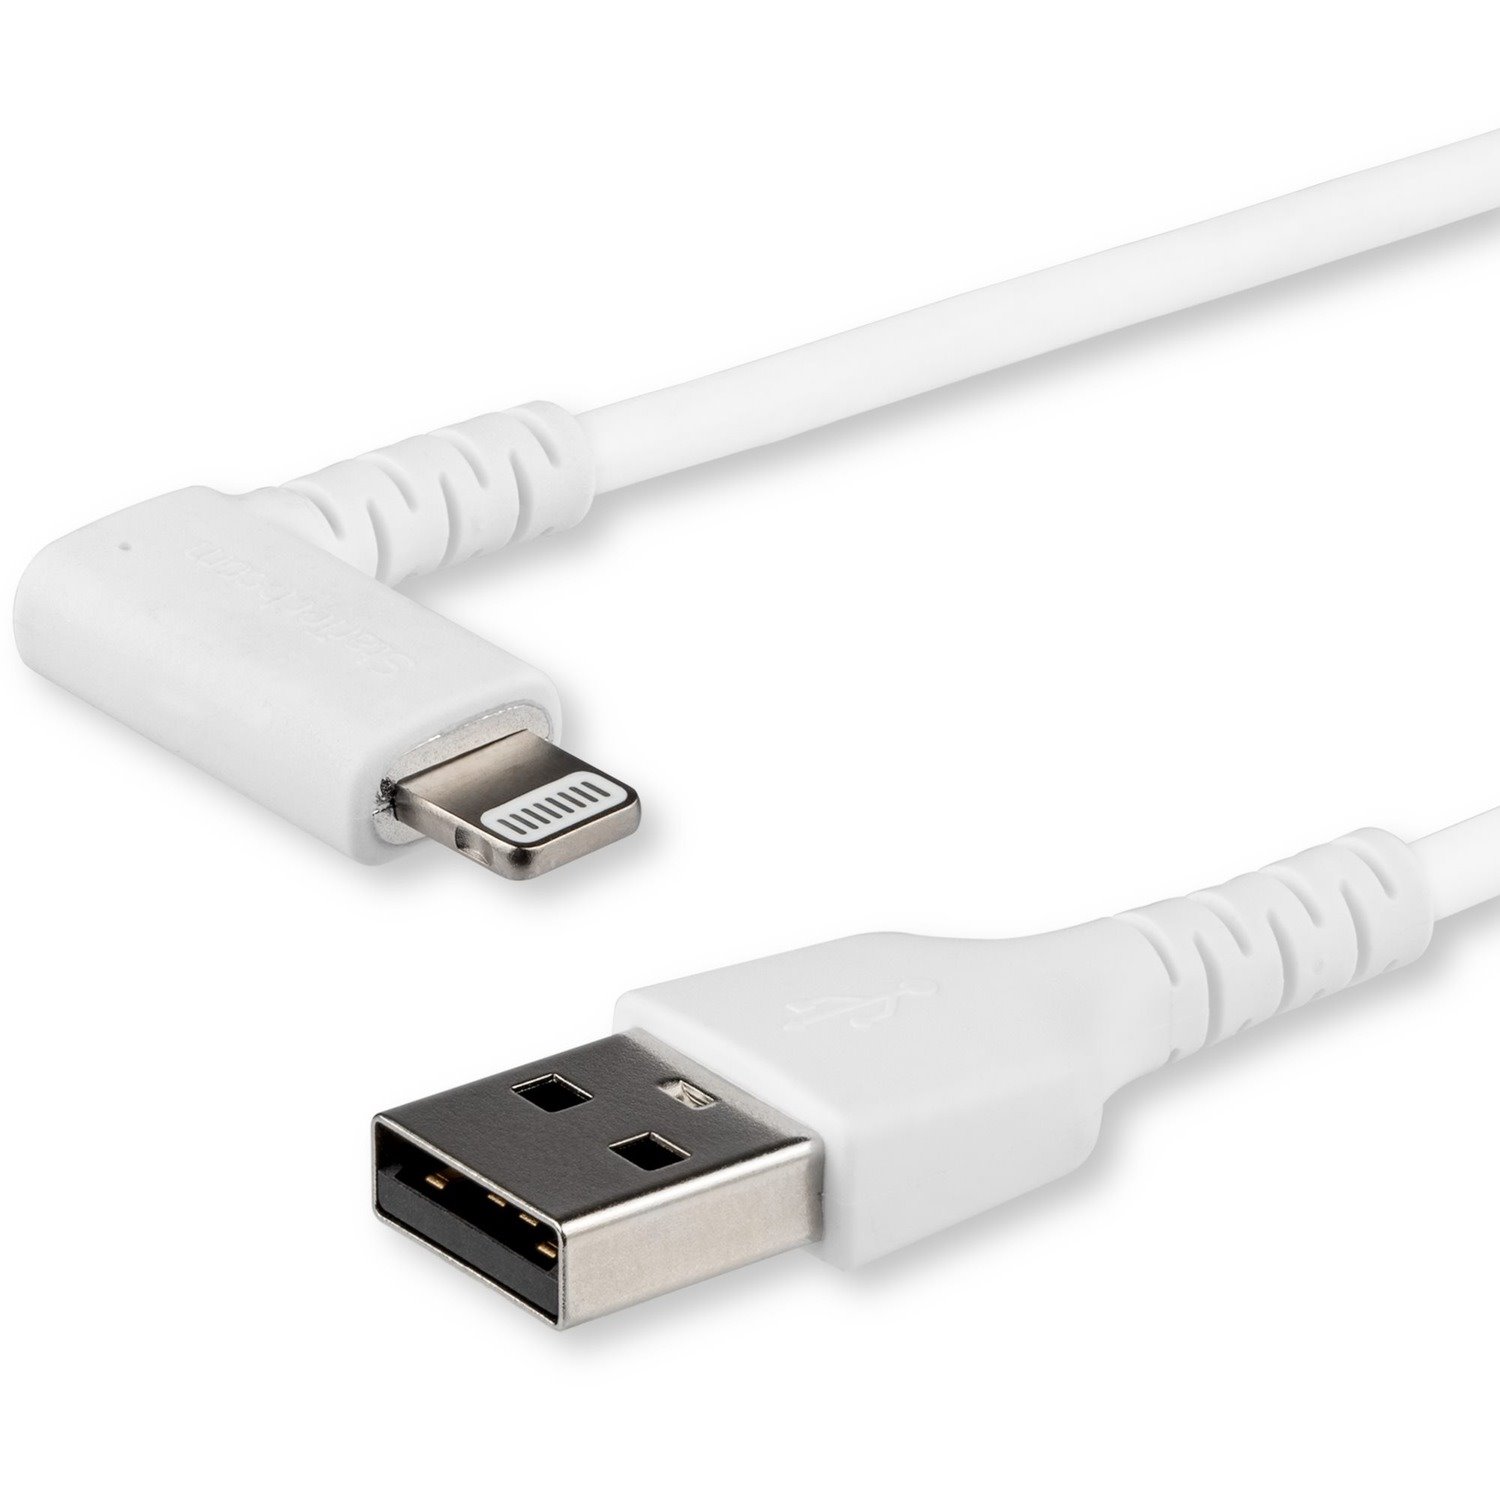 StarTech.com 1 m Lightning/USB Data Transfer Cable for iPhone, iPad